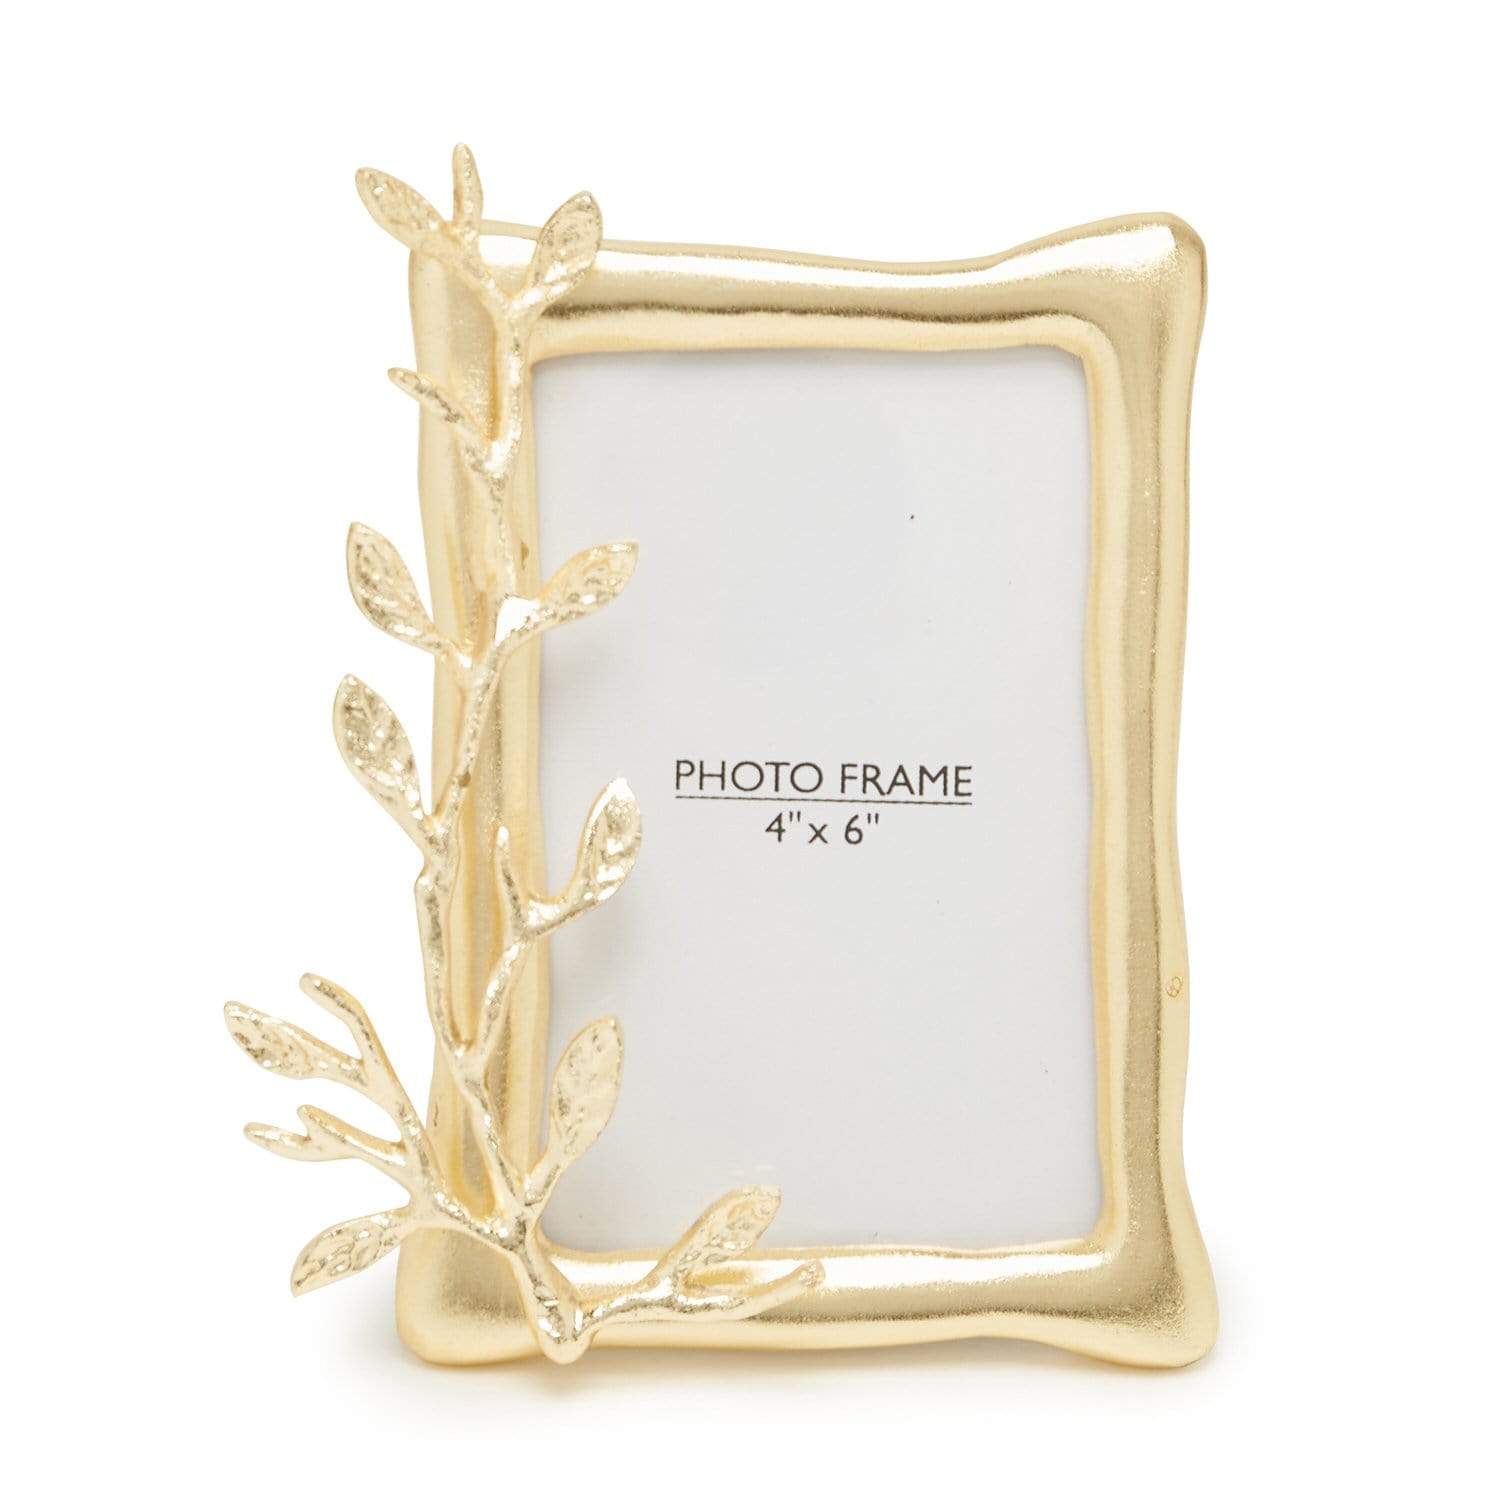 BIRCH PHOTO FRAME 4X6IN GOLD FINISHED BRASS AND ALUM - 1218305S